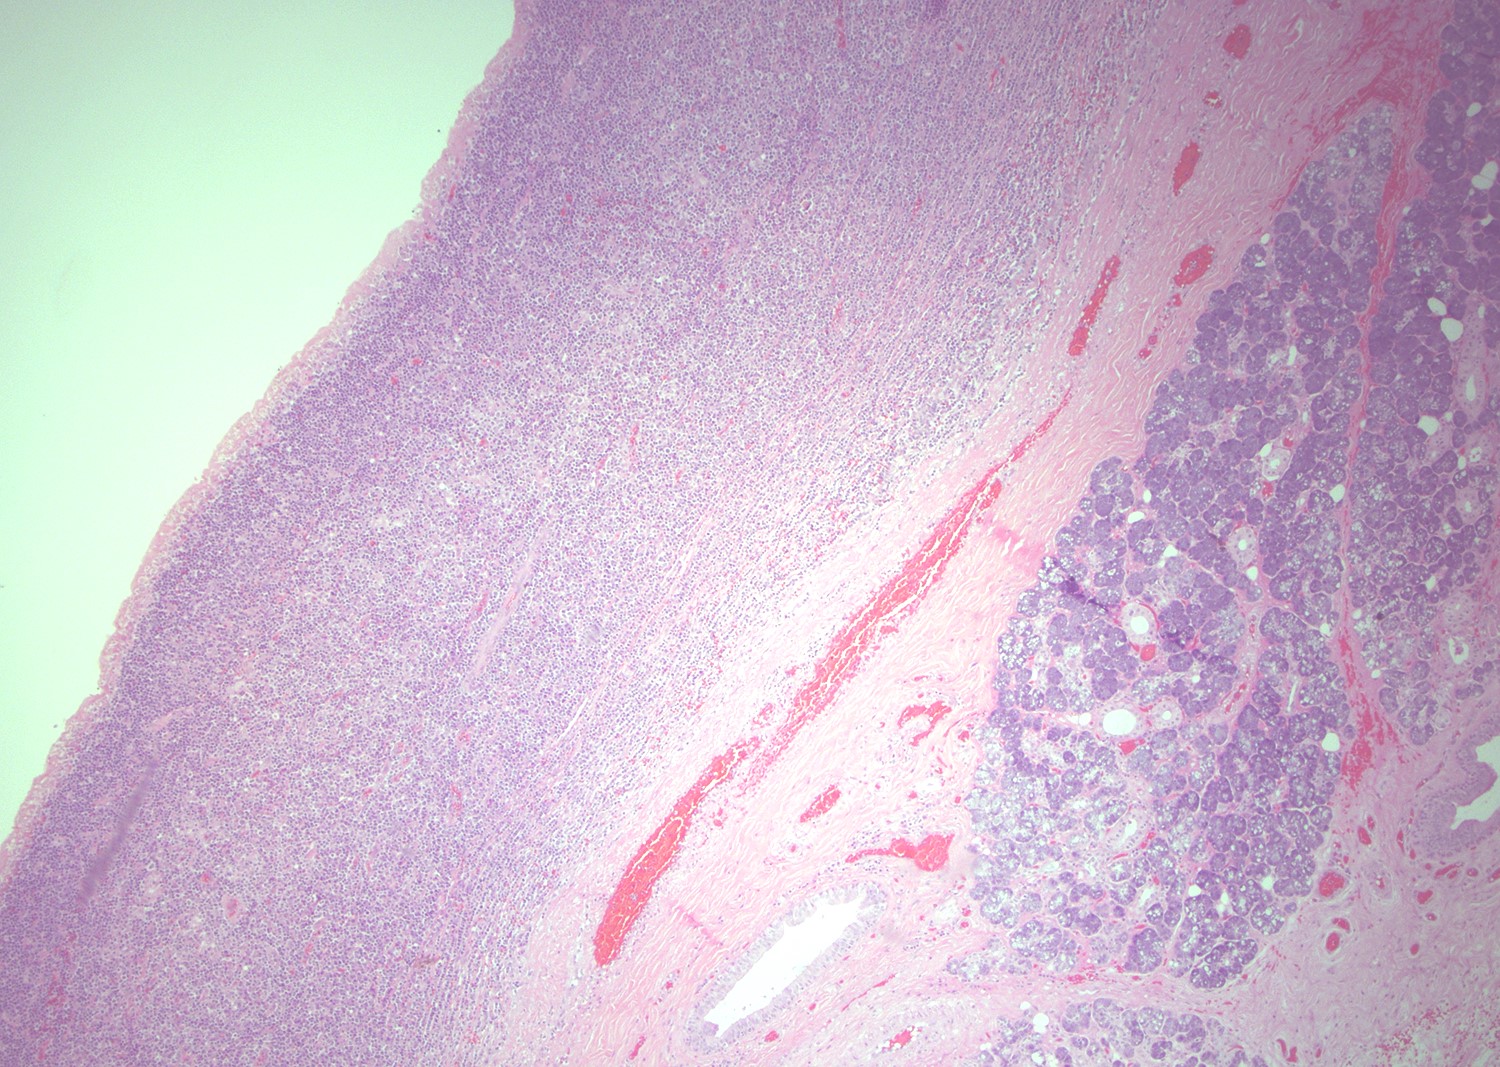 Lymphoepithelial cyst high magnification